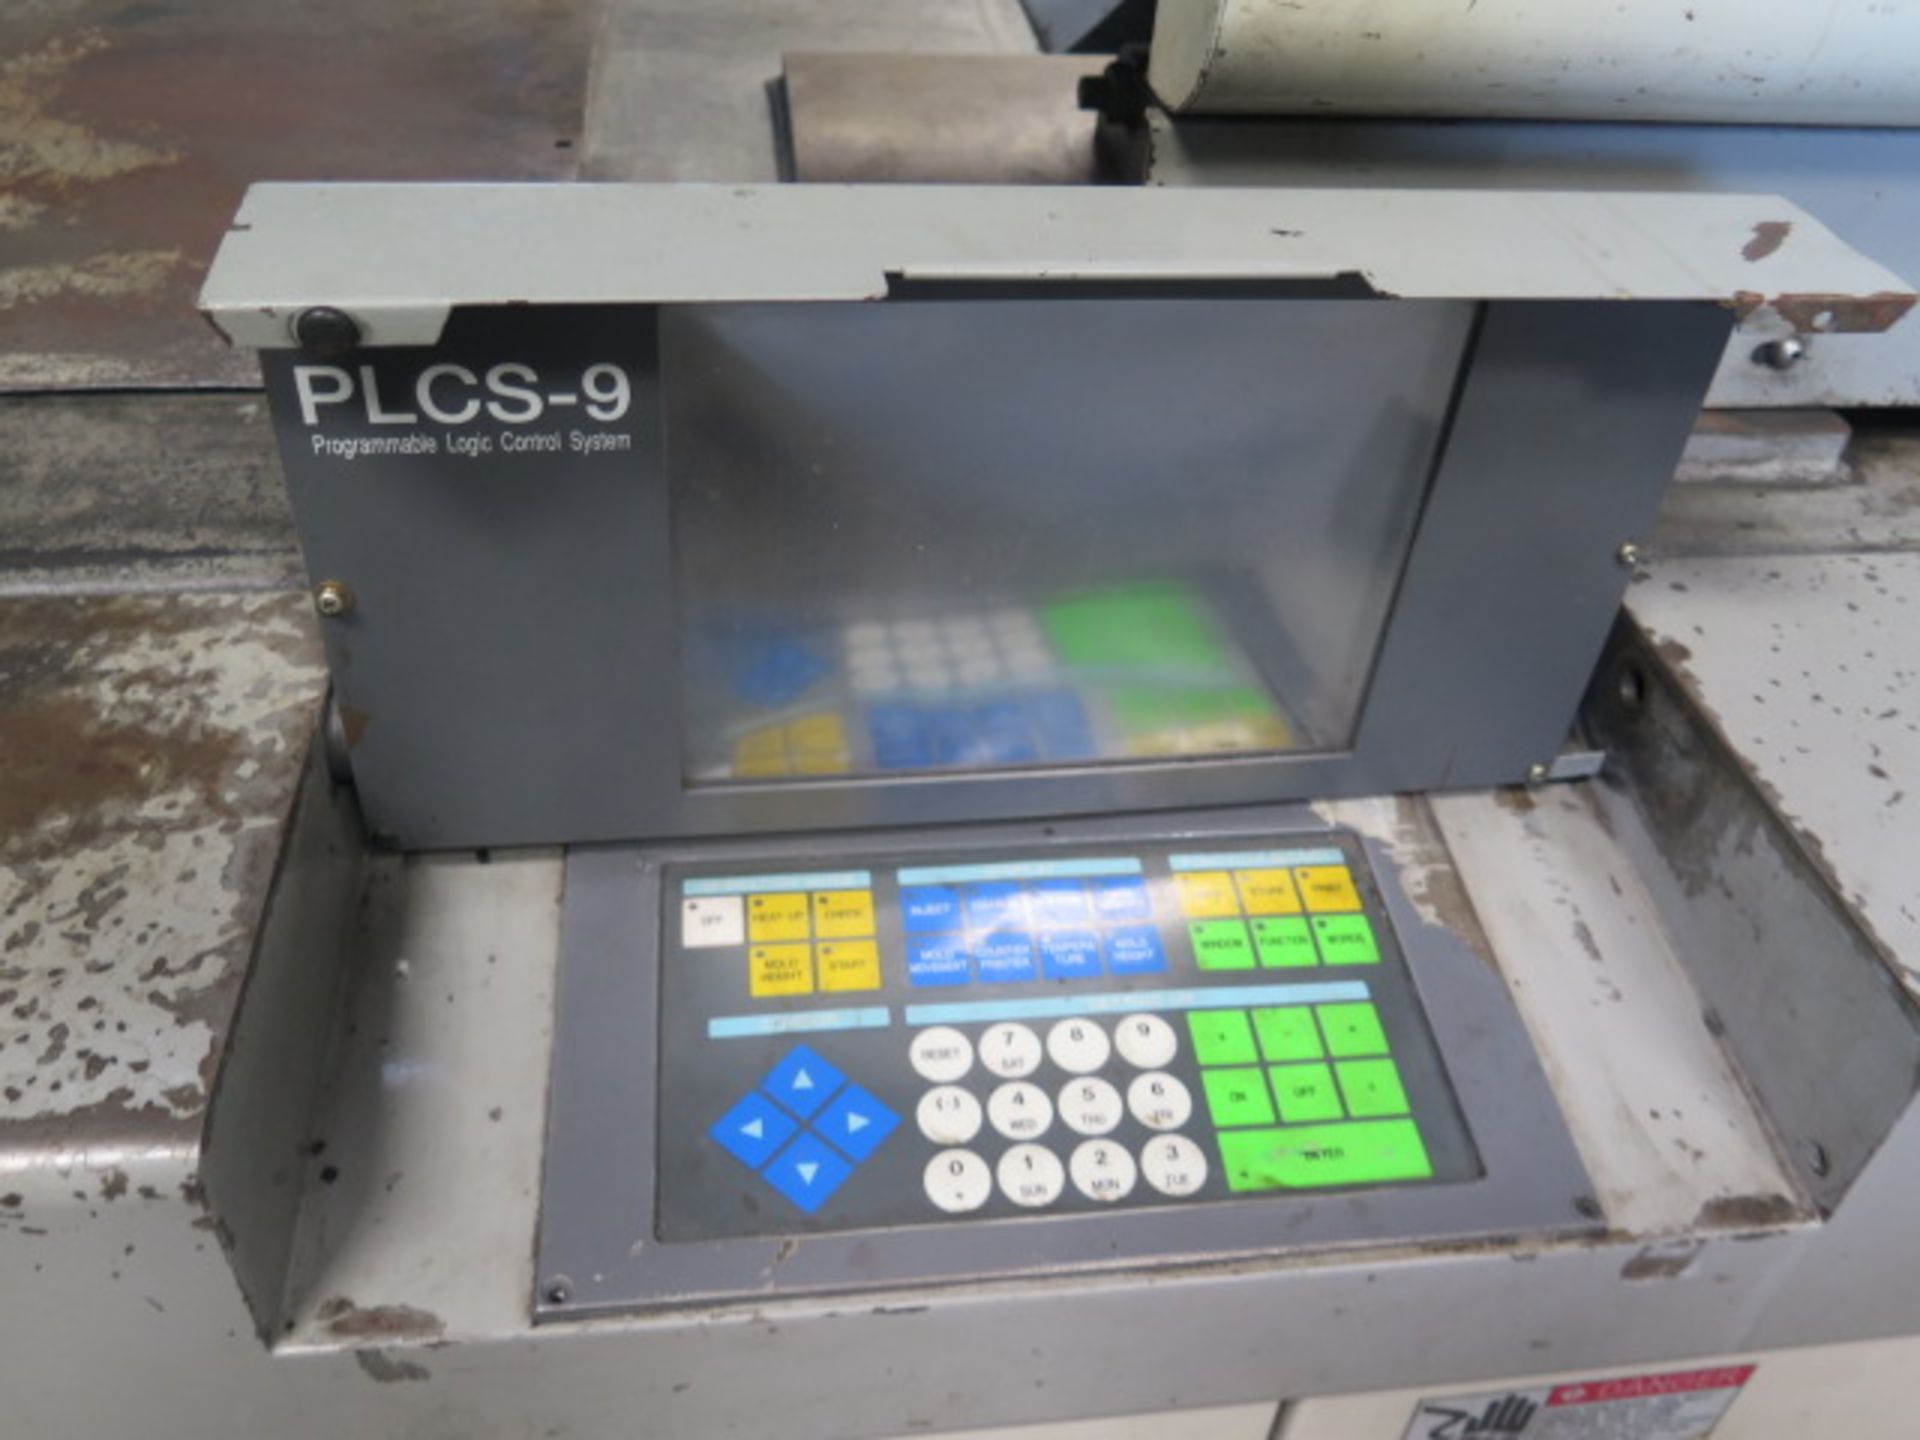 1997 Toyo Machine “Plastar TM-150H” 150 Ton CNC Plastic Injection Molding s/n 1140036, SOLD AS IS - Image 16 of 19